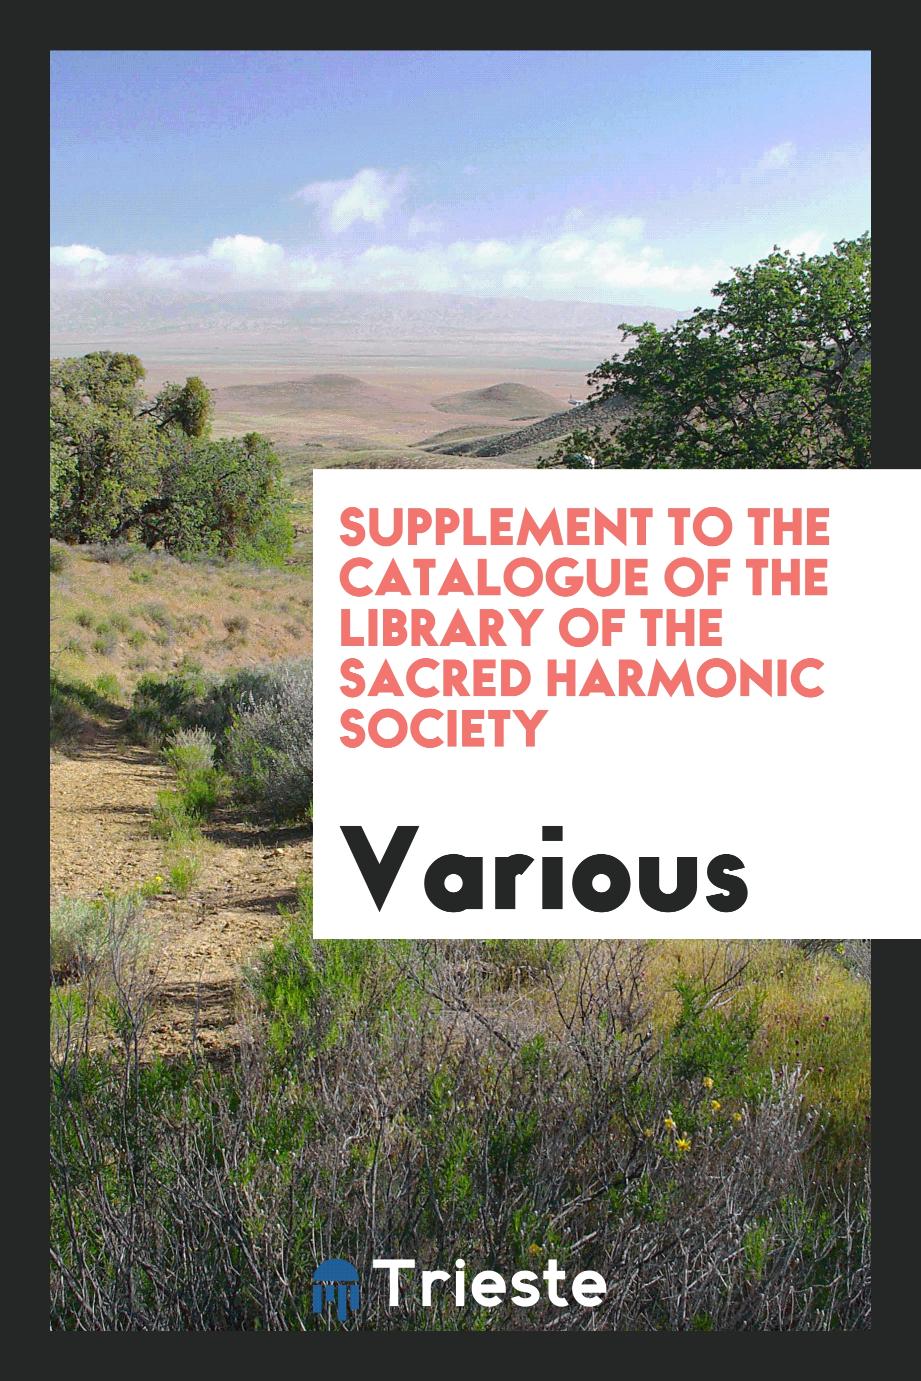 Supplement to the Catalogue of the Library of the Sacred Harmonic Society